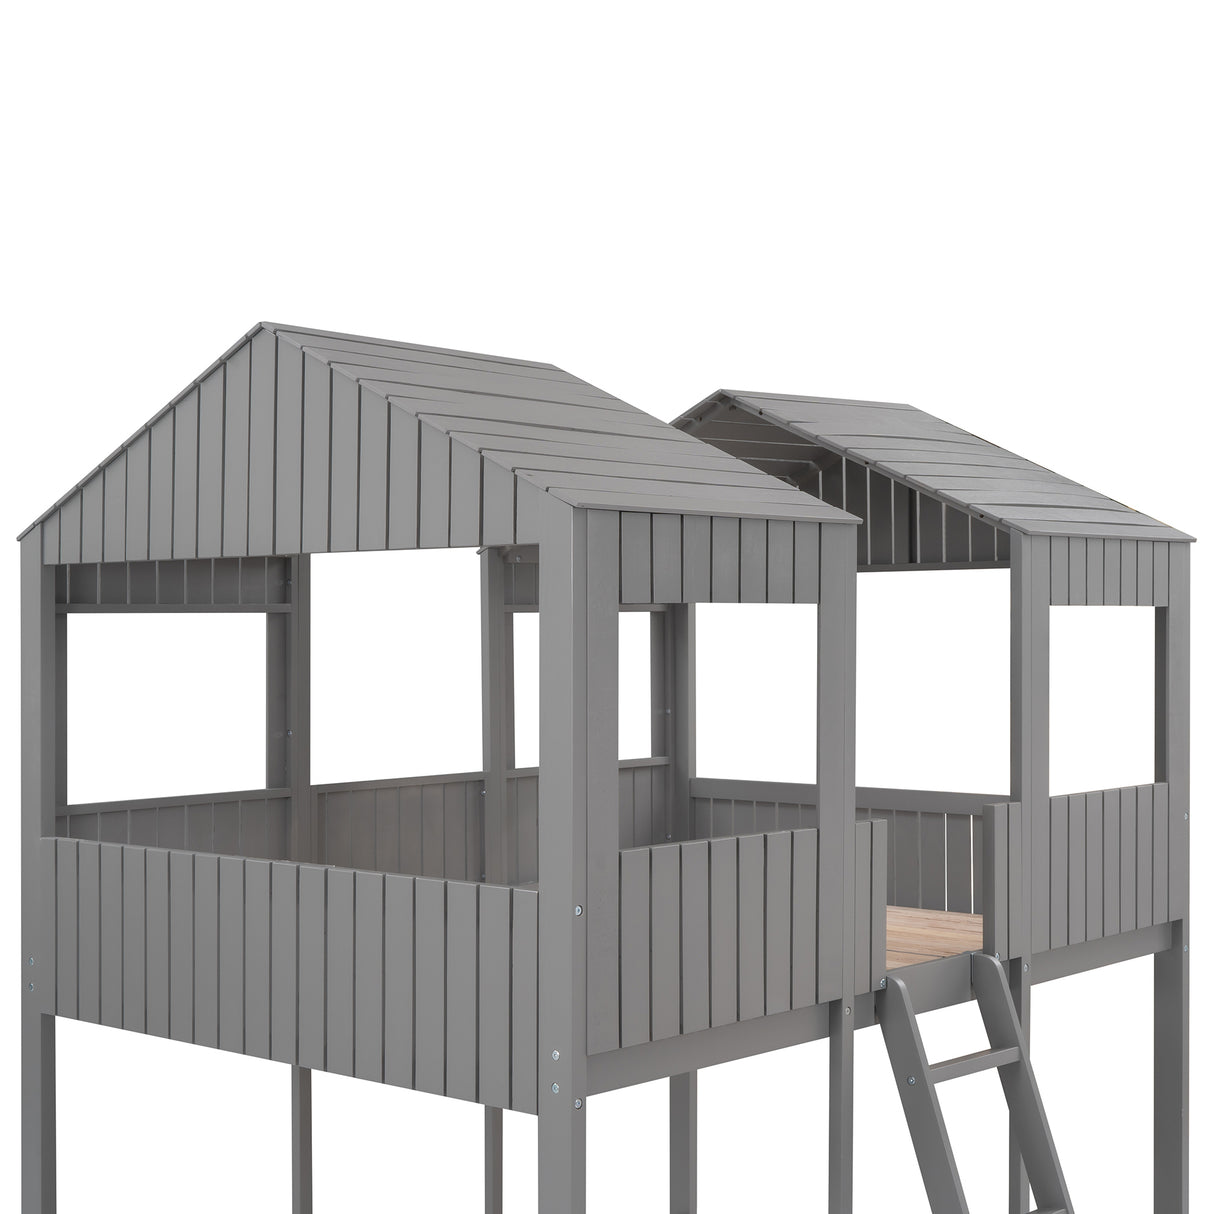 Full Over Full WoodBunk Bed with Roof, Window, Guardrail, Ladder (Gray)( old sku: LP000031AAN ) - Home Elegance USA